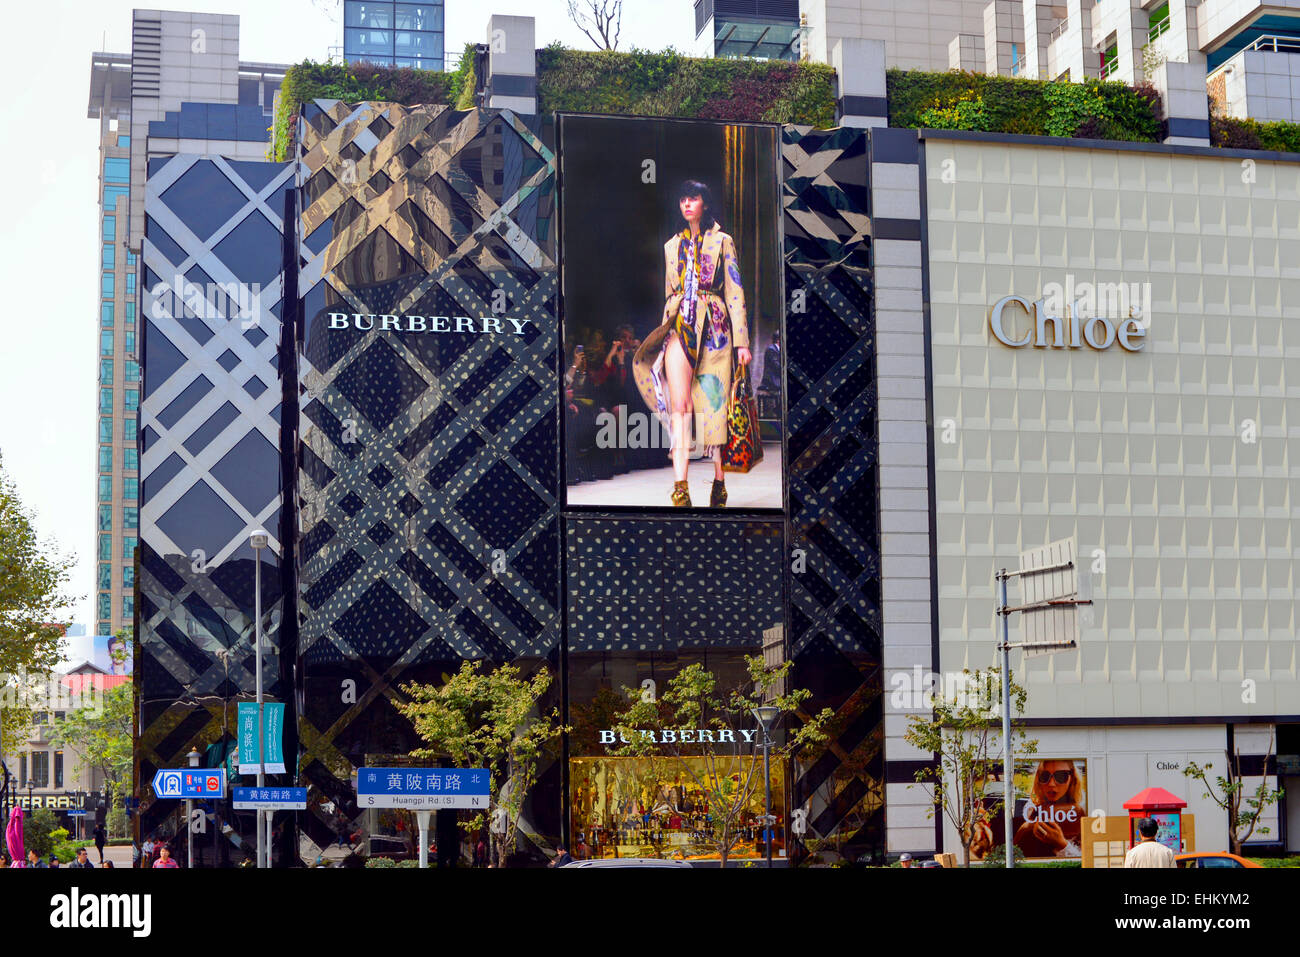 Burberry store with screen featuring footage of models walking, and Chloe  boutique on the fashionable Huangpi Road in Shanghai Stock Photo - Alamy